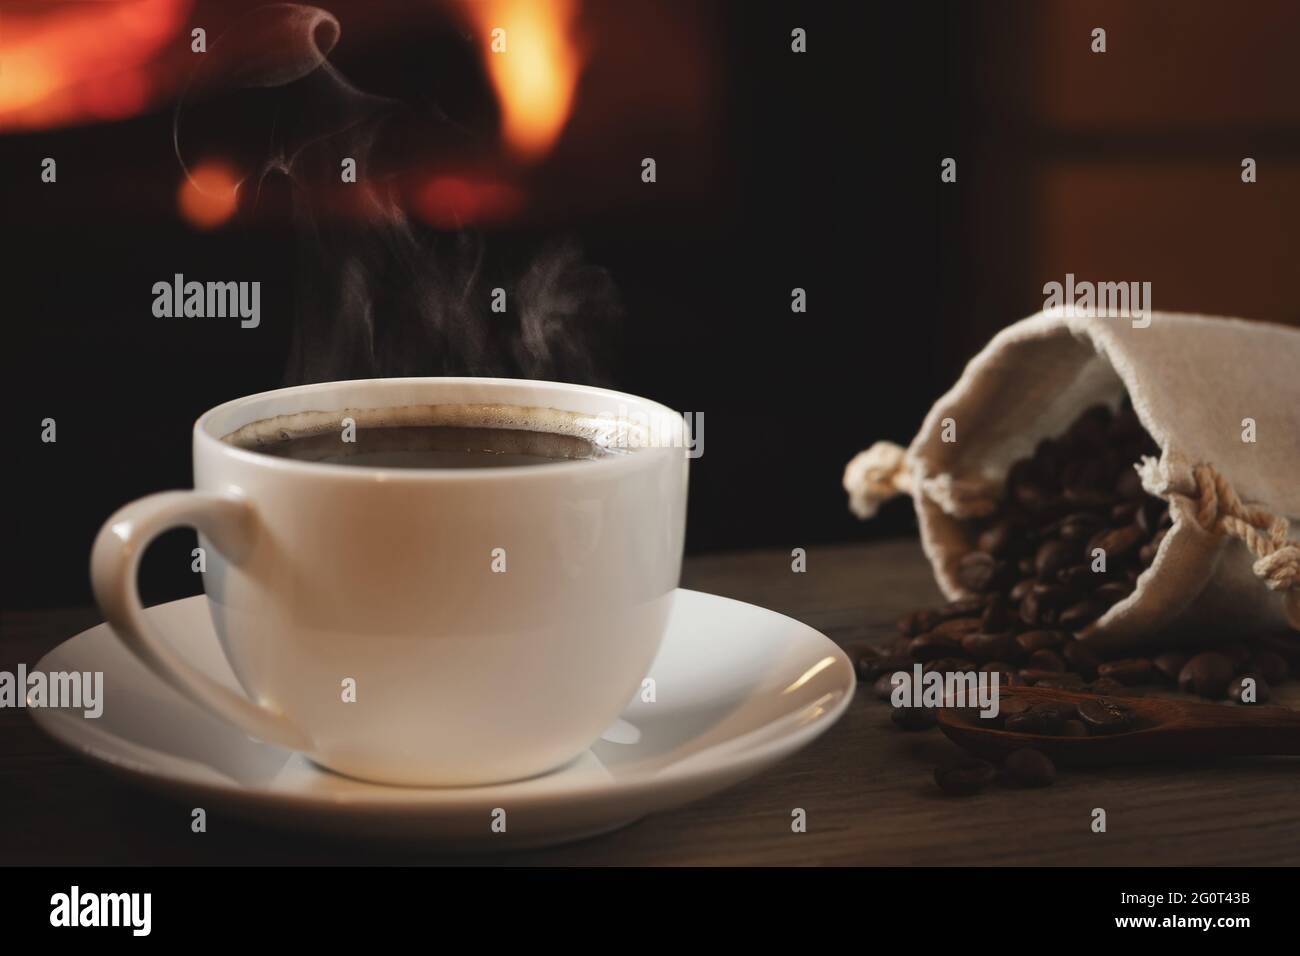 Close-up of cup of hot coffee and coffee beans in a bag on a wooden table in front of a burning fireplace. Selective focus. Stock Photo